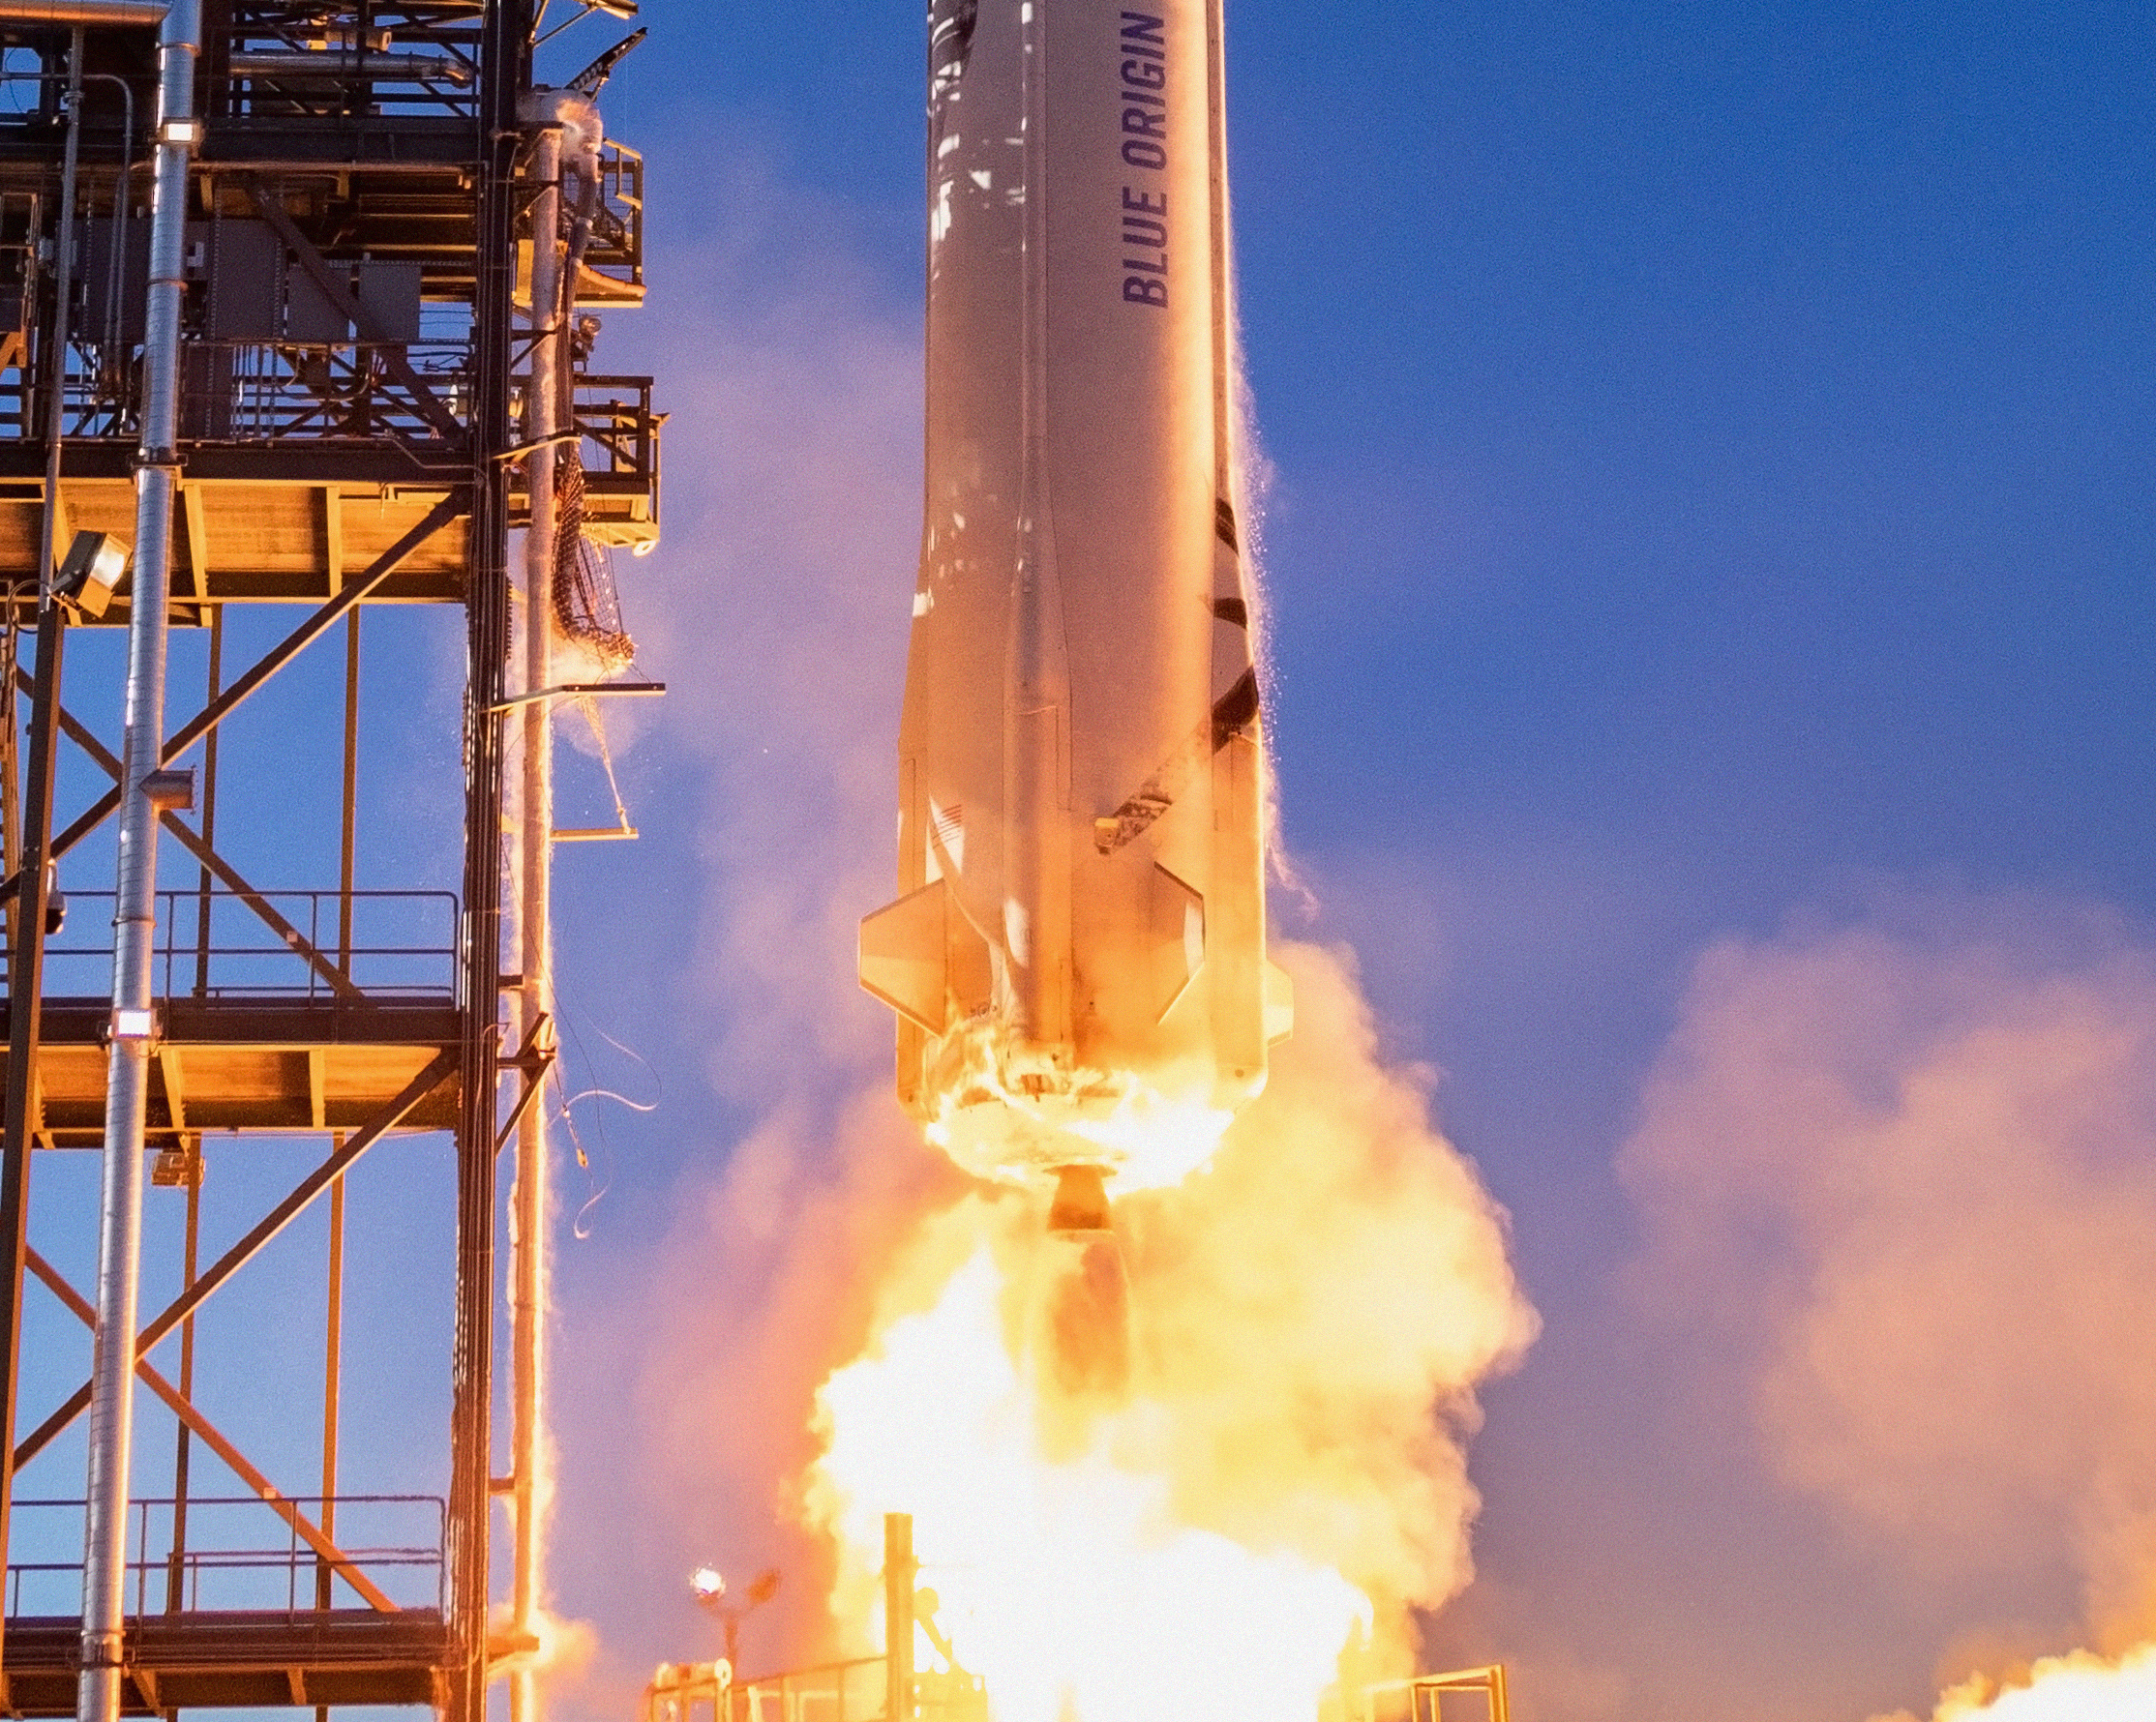 A close-up of the bottom half of New Shepard, including the engine nozzle, next to the launch tower just after liftoff. A plume of fiery exhaust and light pink smoke clouds surround the vehicle.